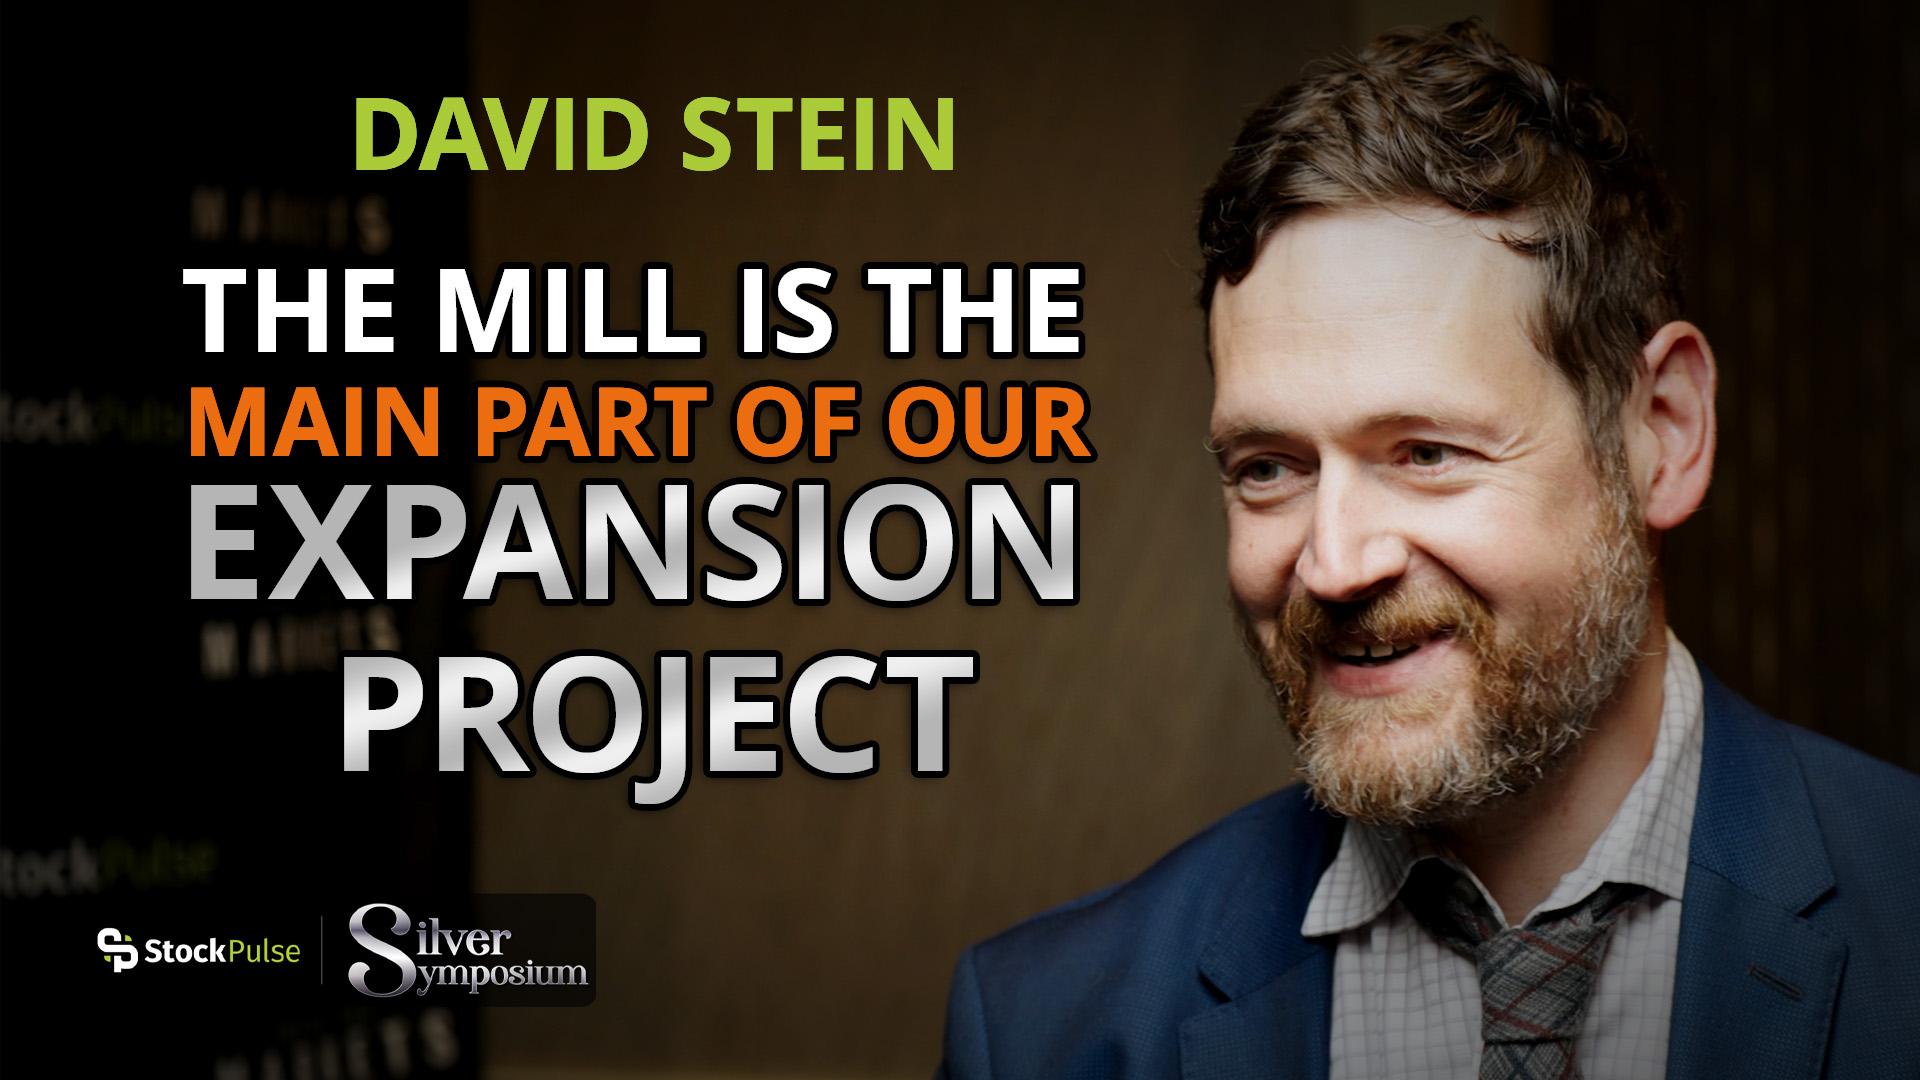 David Stein: The Mill is the Main Part of Our Expansion Project